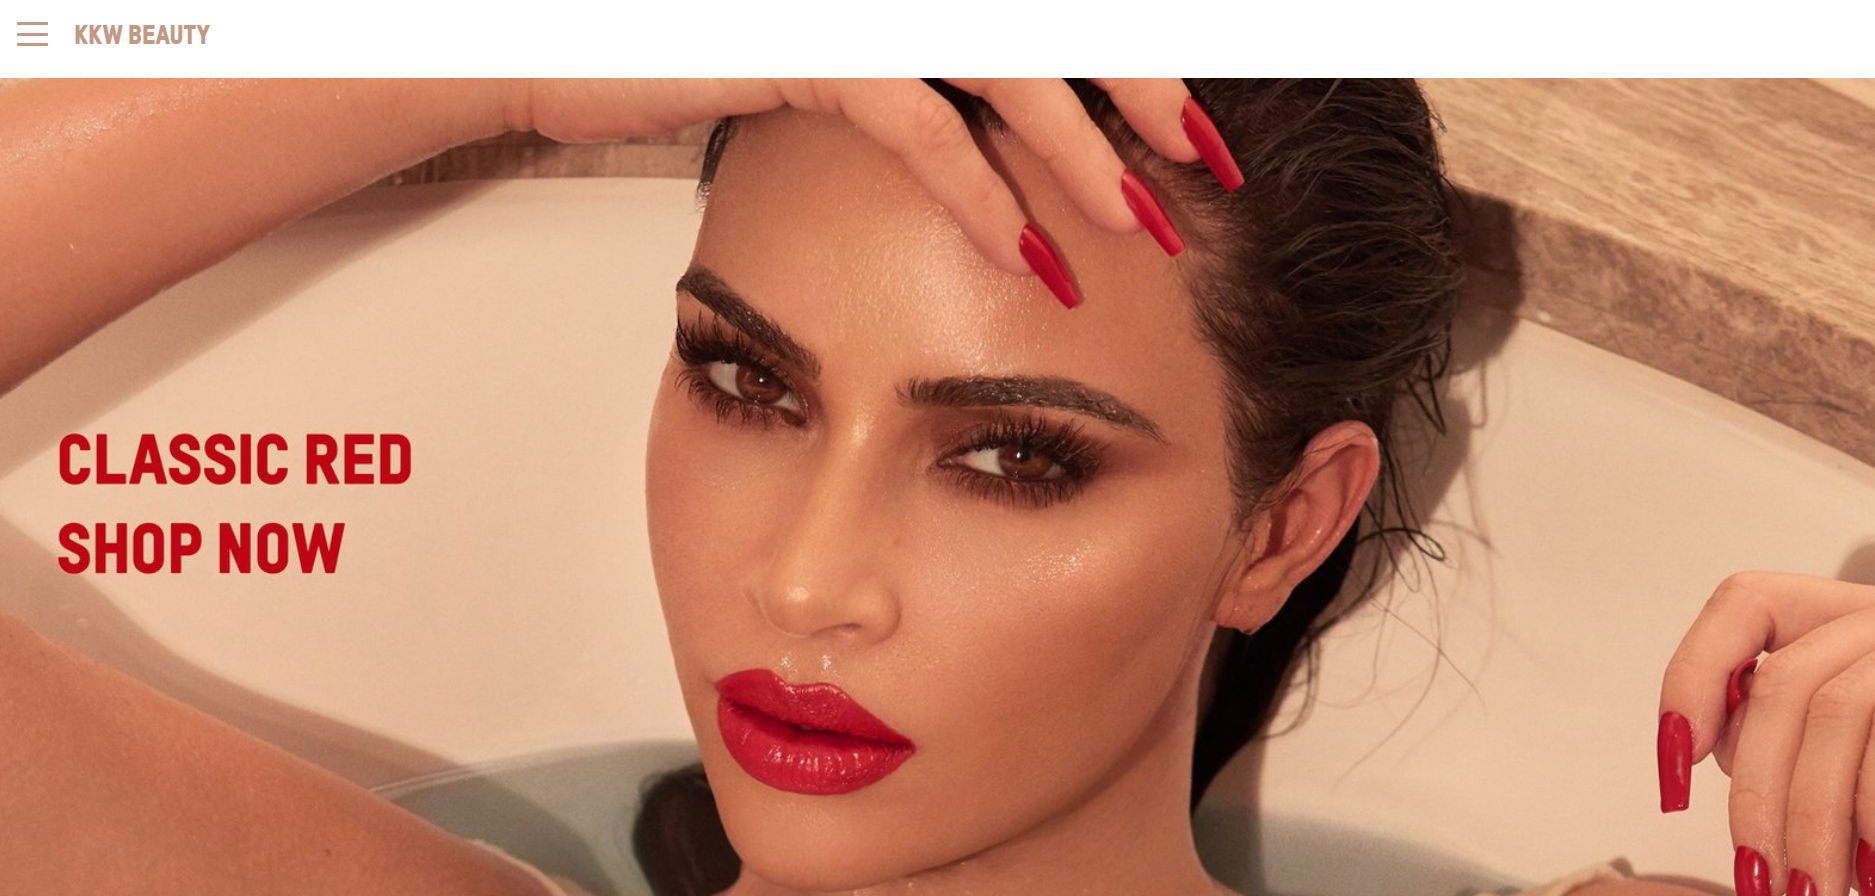 A screenshot of KKW Beauty's ecommerce store homepage.